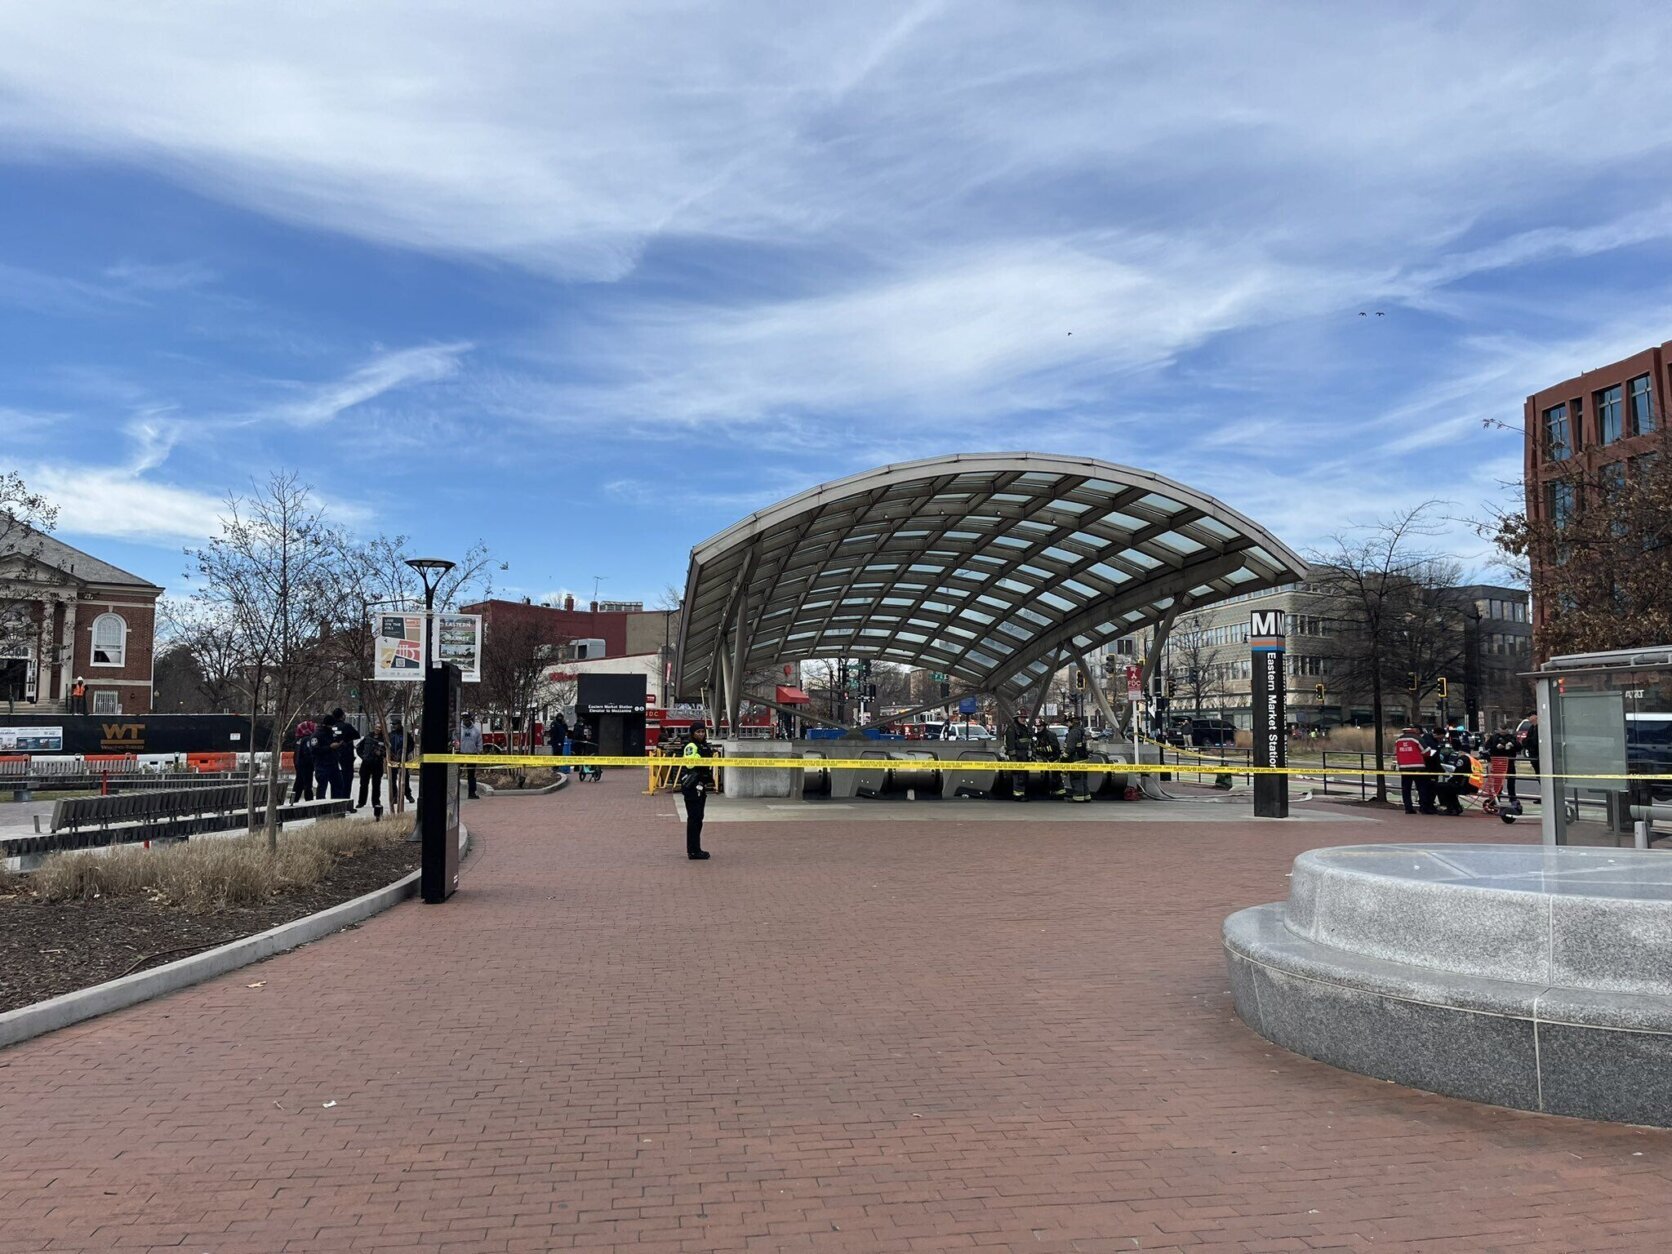 Service suspended at Eastern Market Metro station